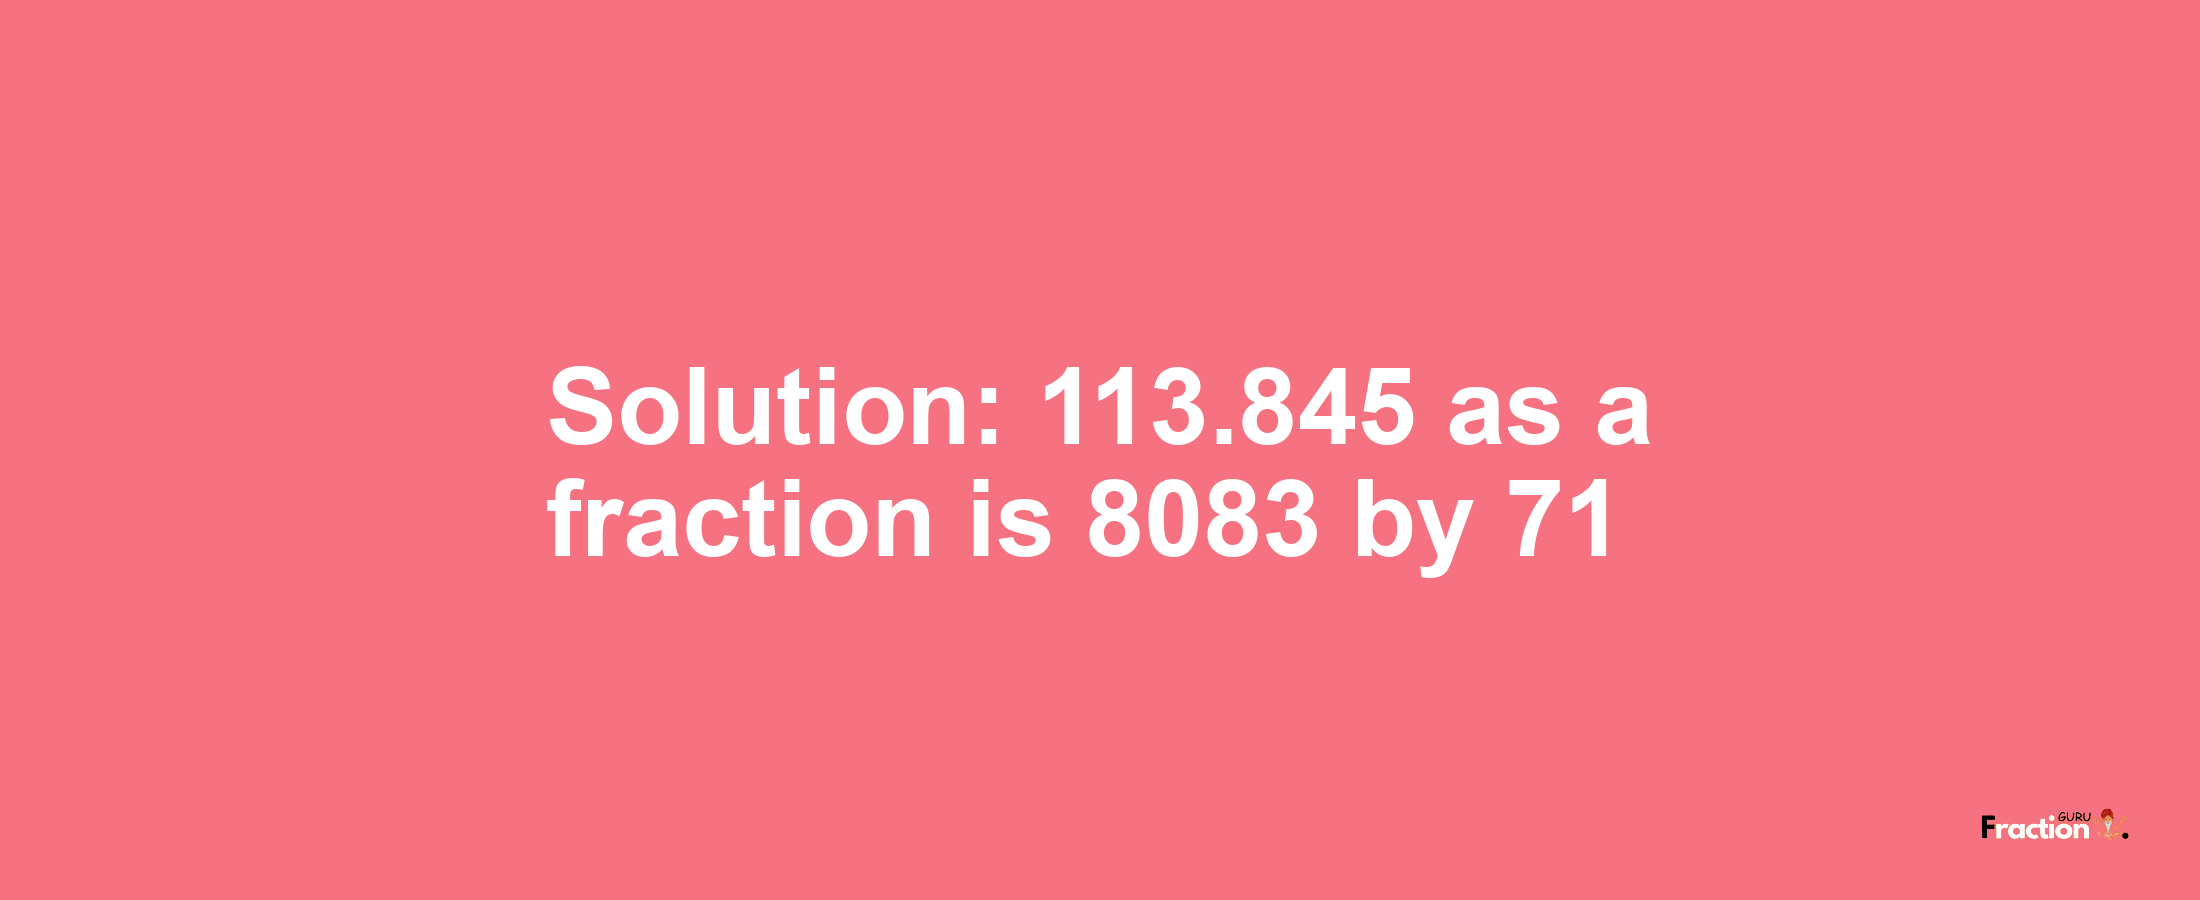 Solution:113.845 as a fraction is 8083/71